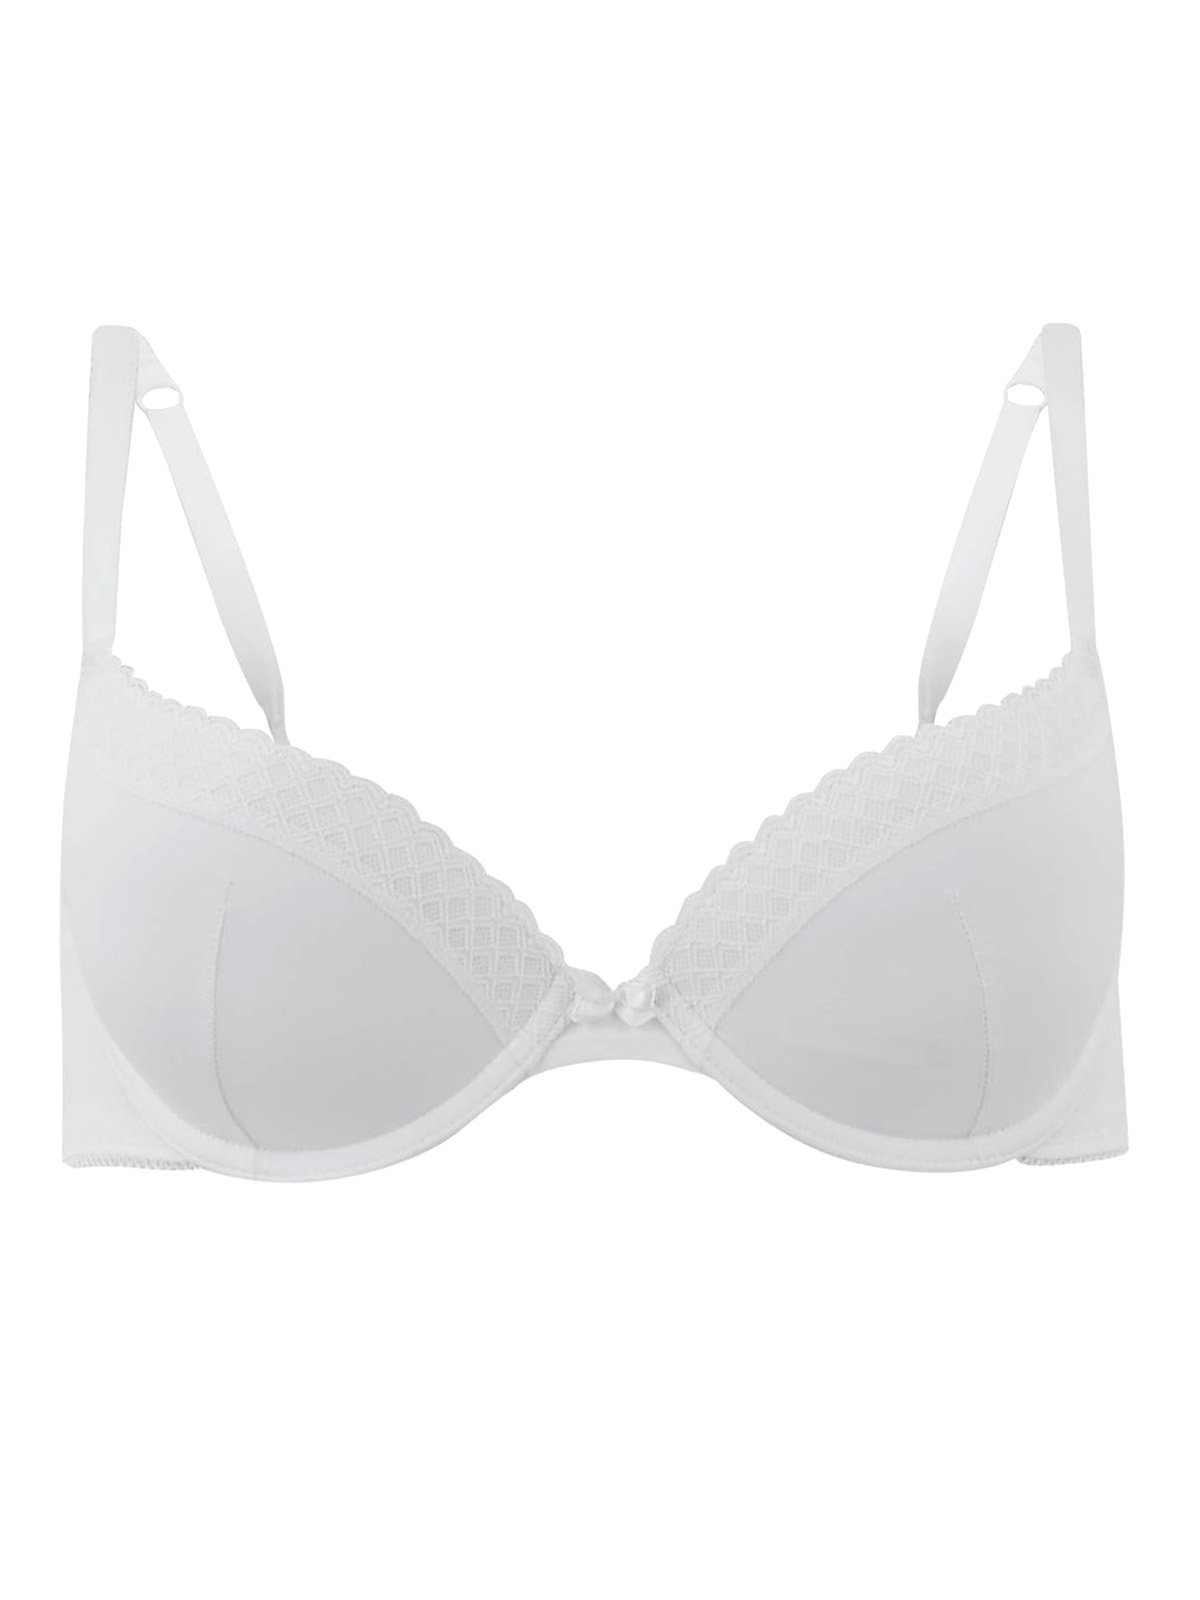 Marks and Spencer - - M&5 ASSORTED Padded Bras - Size 32 to 42 (A-B-C-D ...